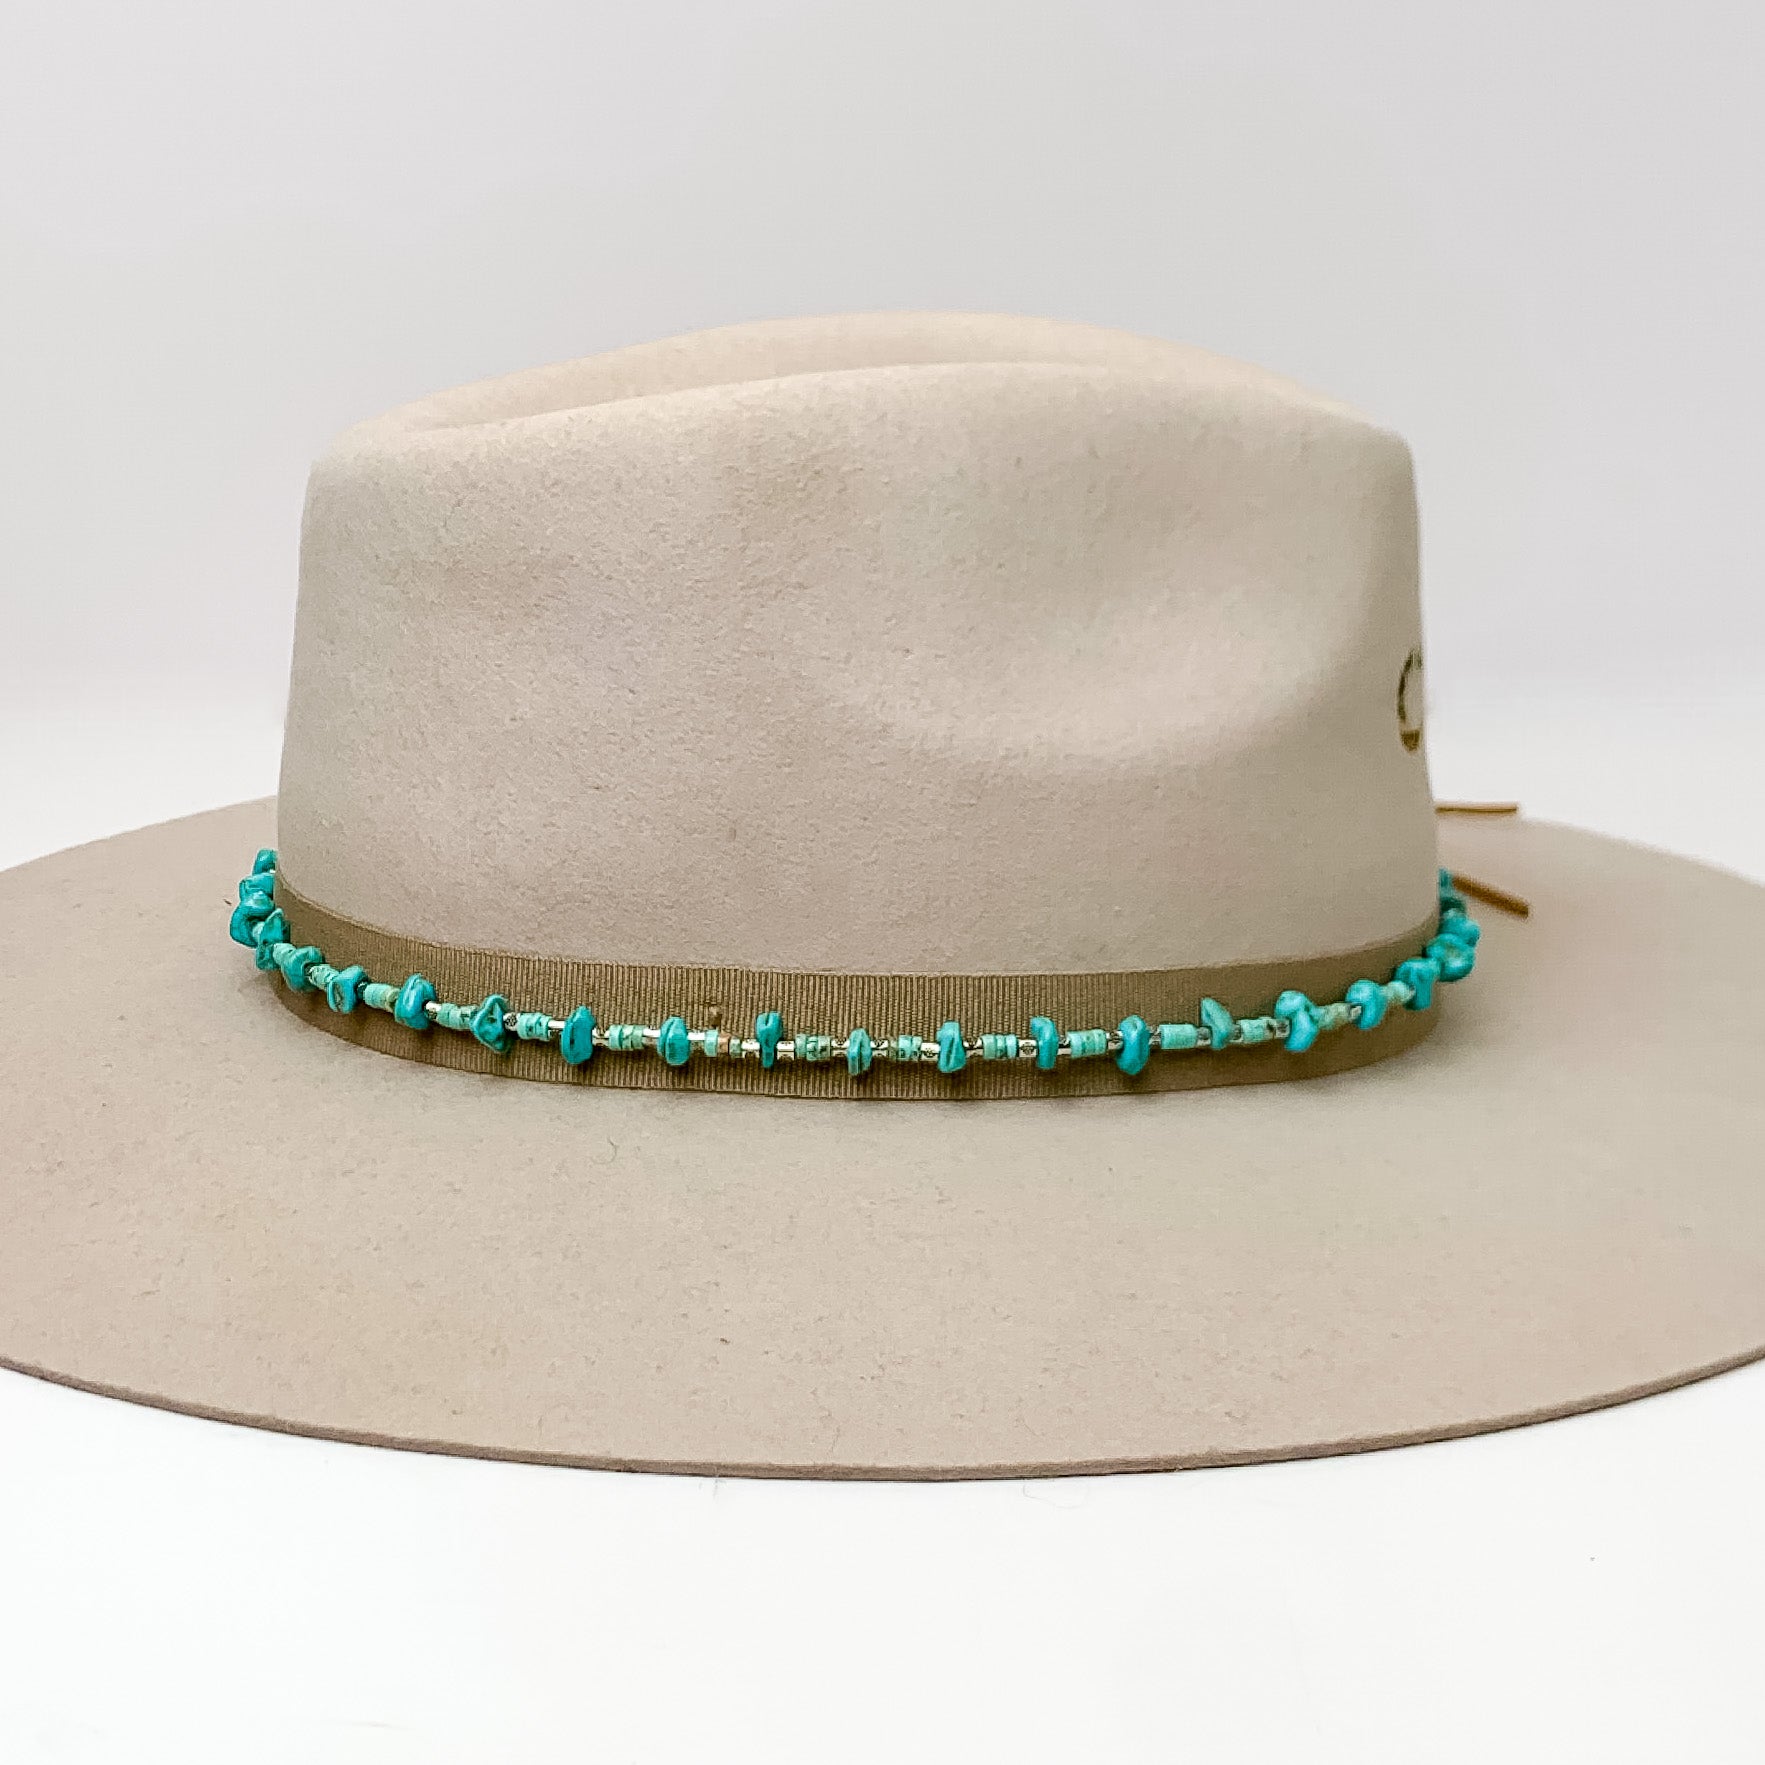 Hat Band With Turquoise Stones and Light Brown Ties. Pictured on a light brown hat with a white background.